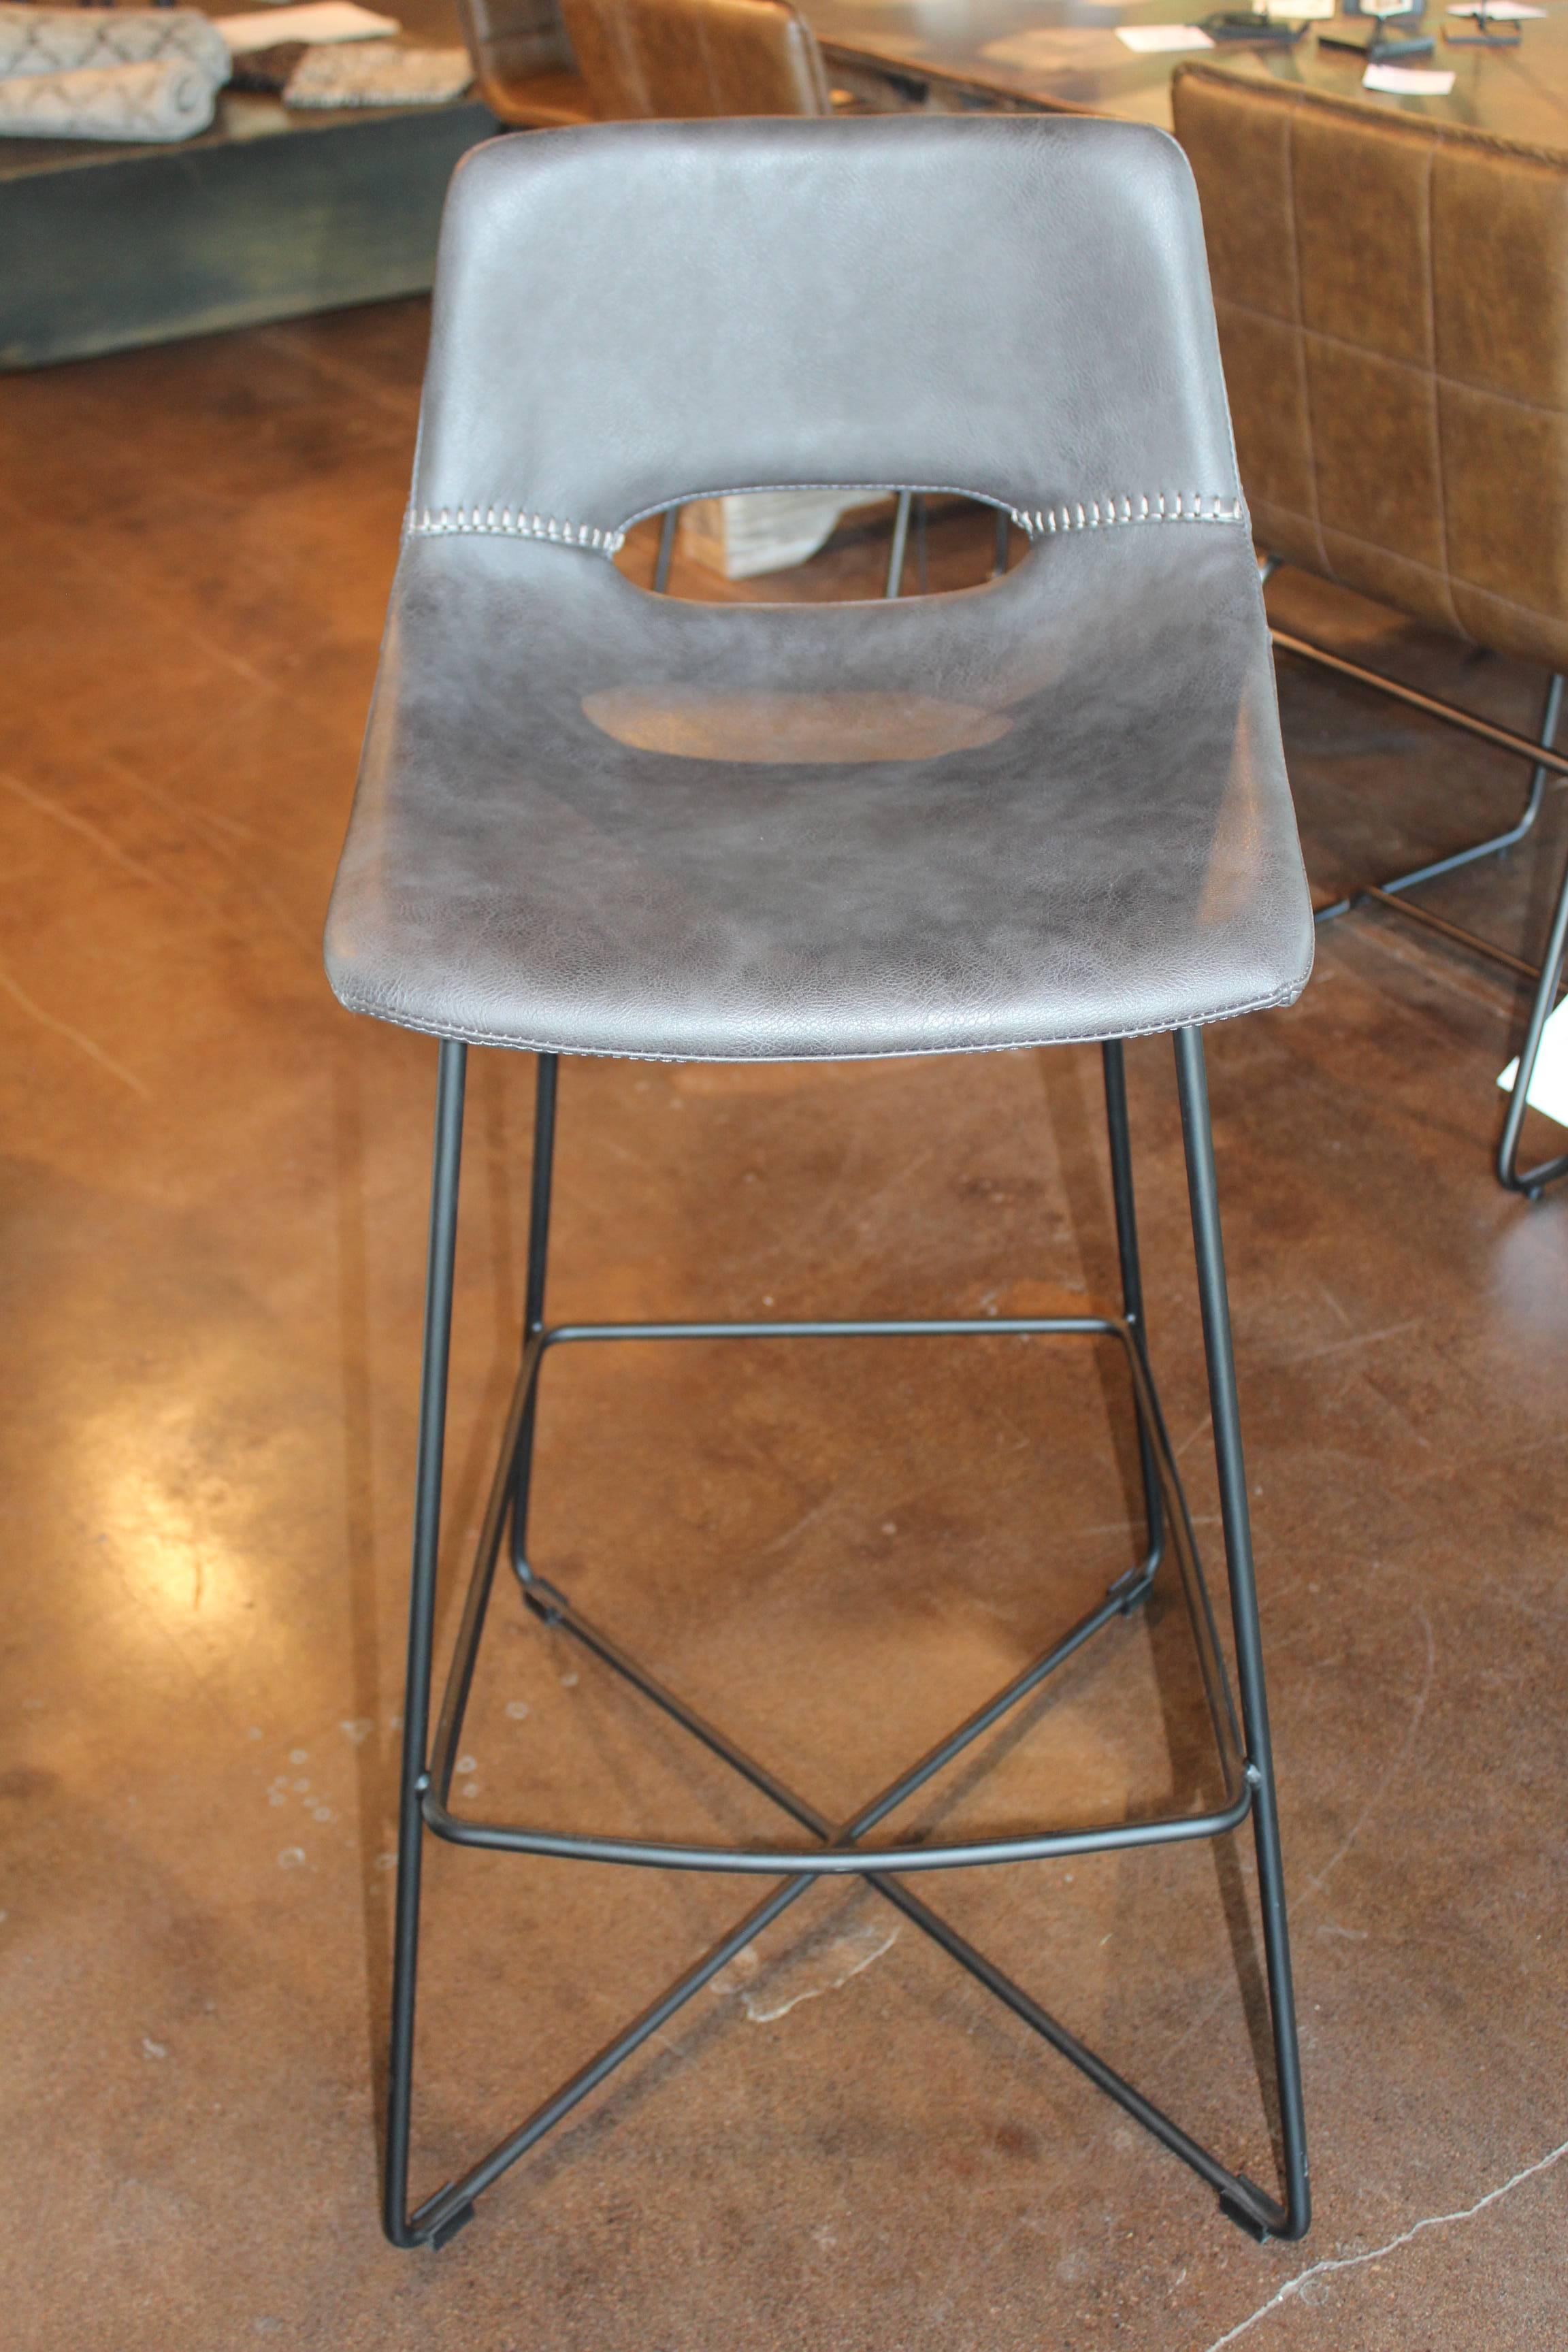 Modern Contemporary Bar Stool in Bonded Leather